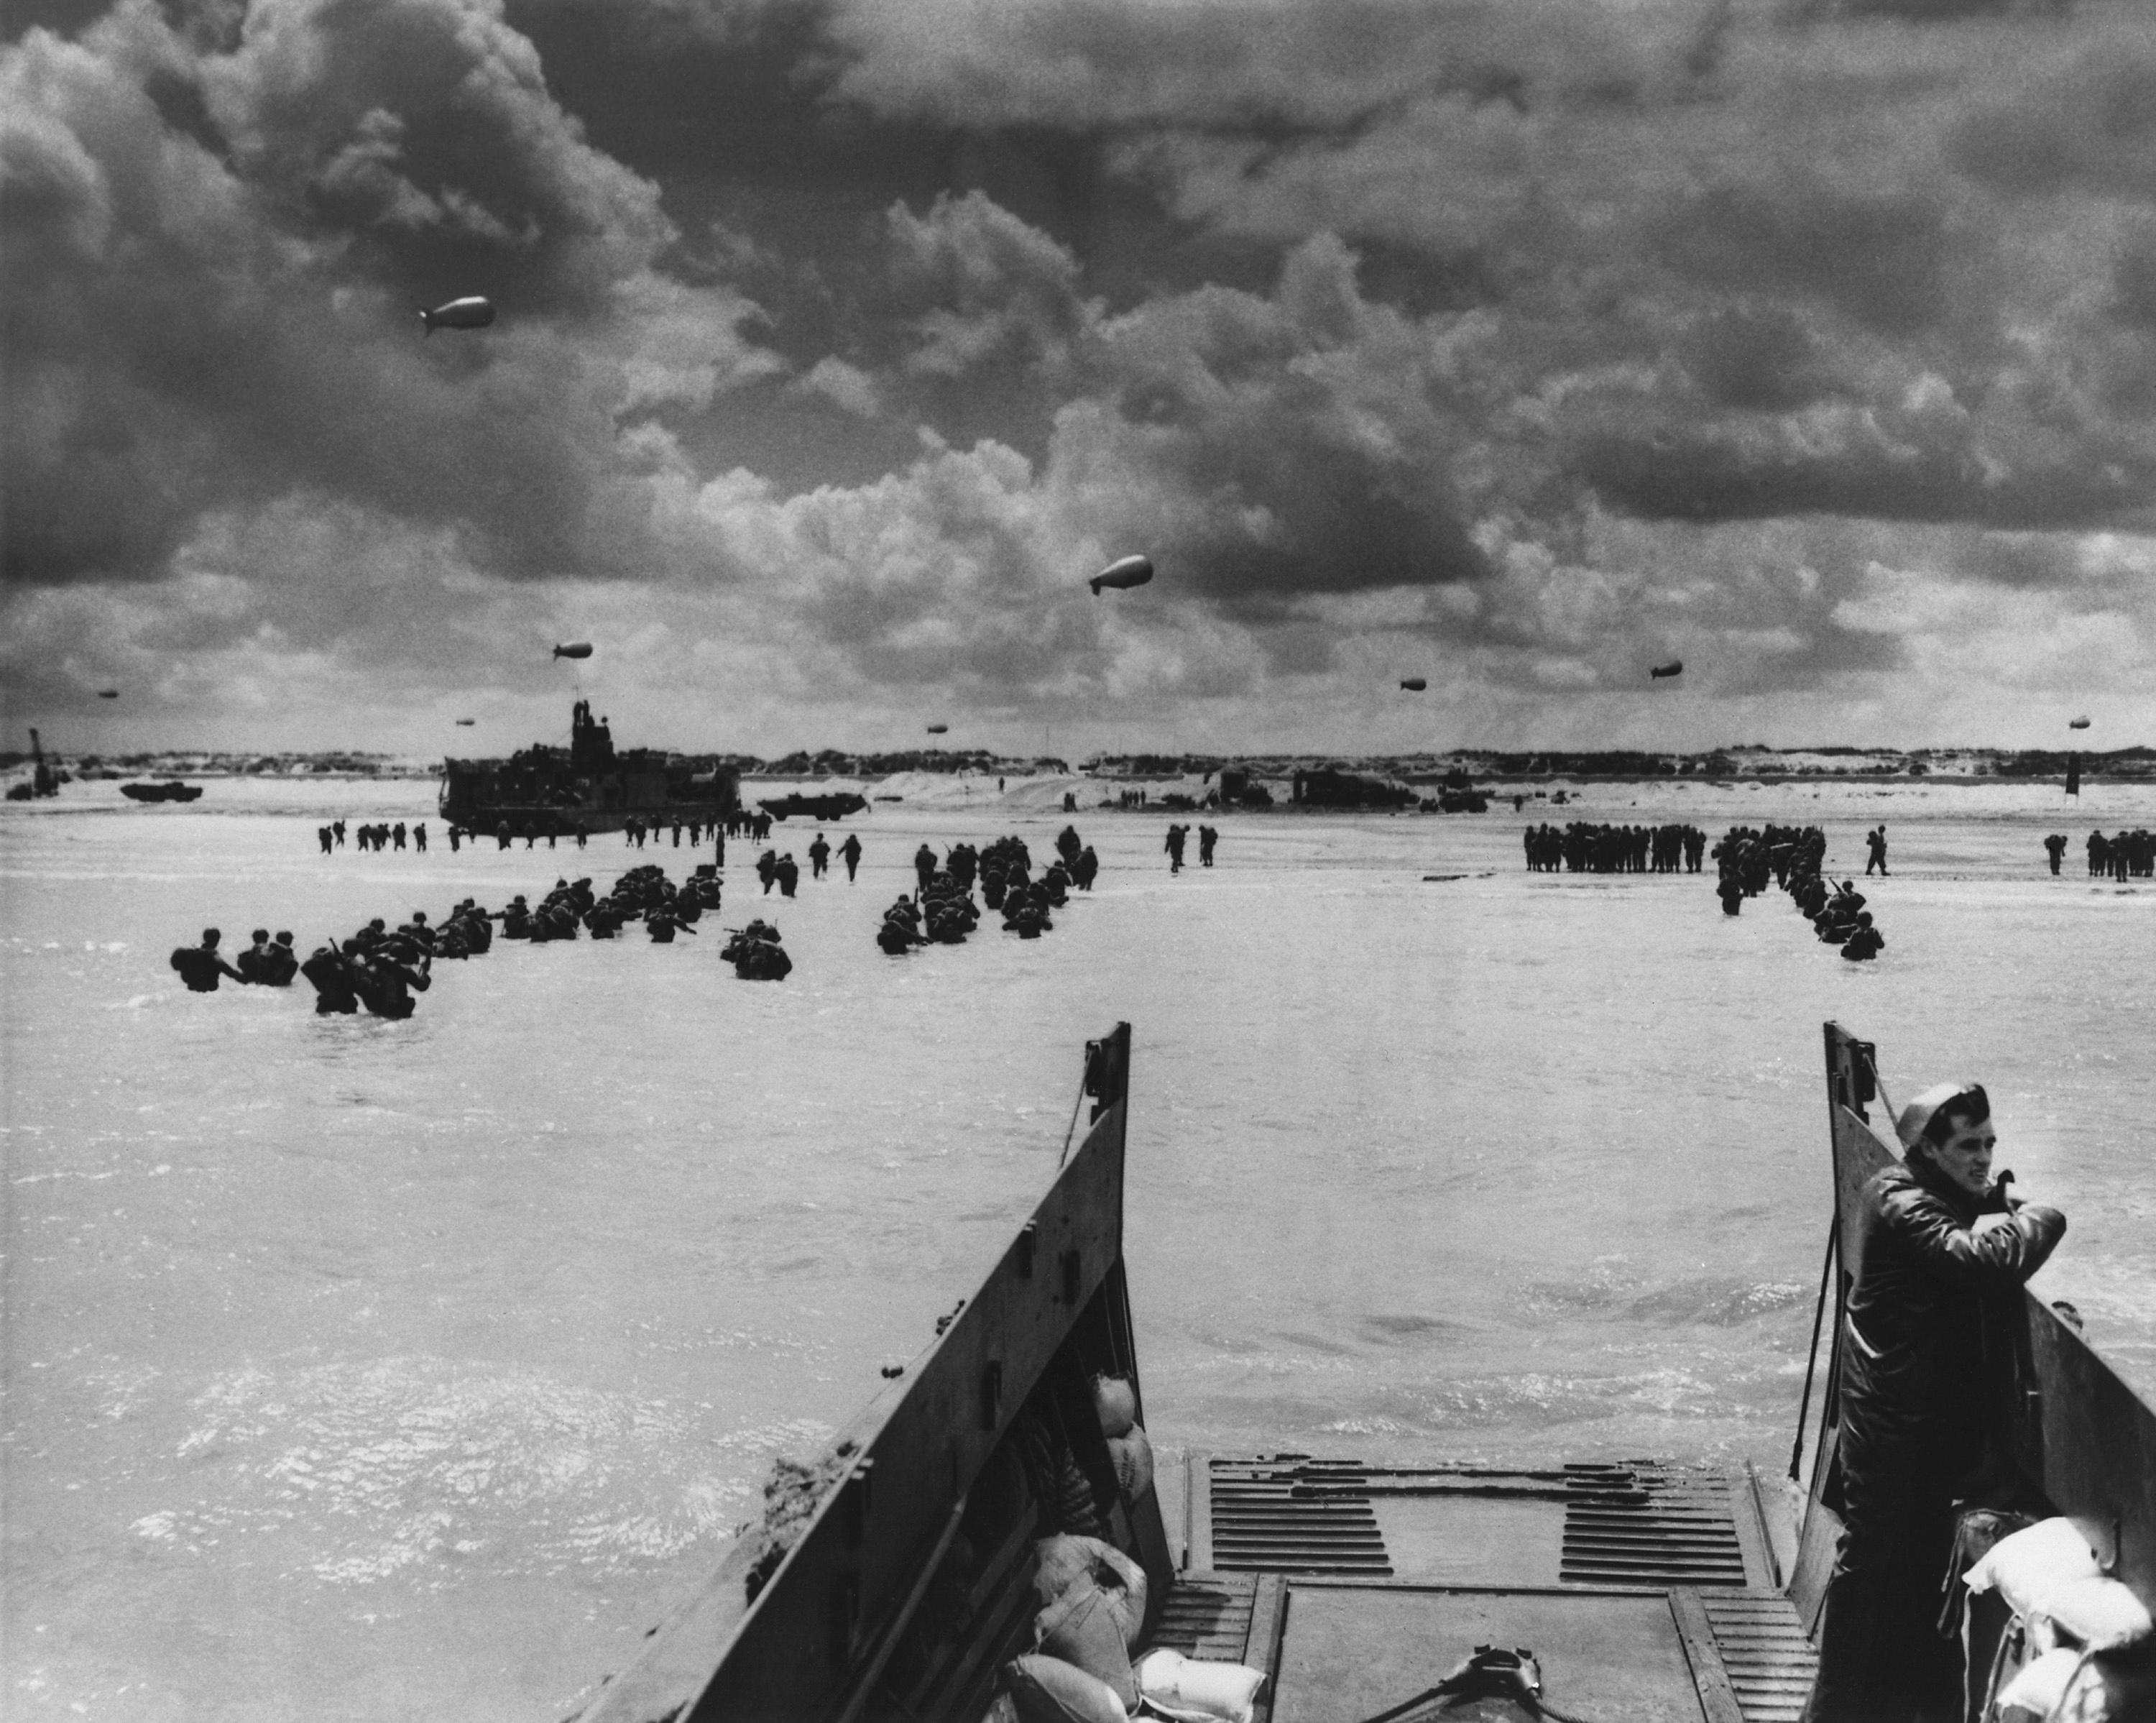 U.S. Troops land at Normandy on D-Day. With the beach taken and barrage balloons deterring German aircraft, soldiers and supplies flooded into France in June 1944, during World War 2.